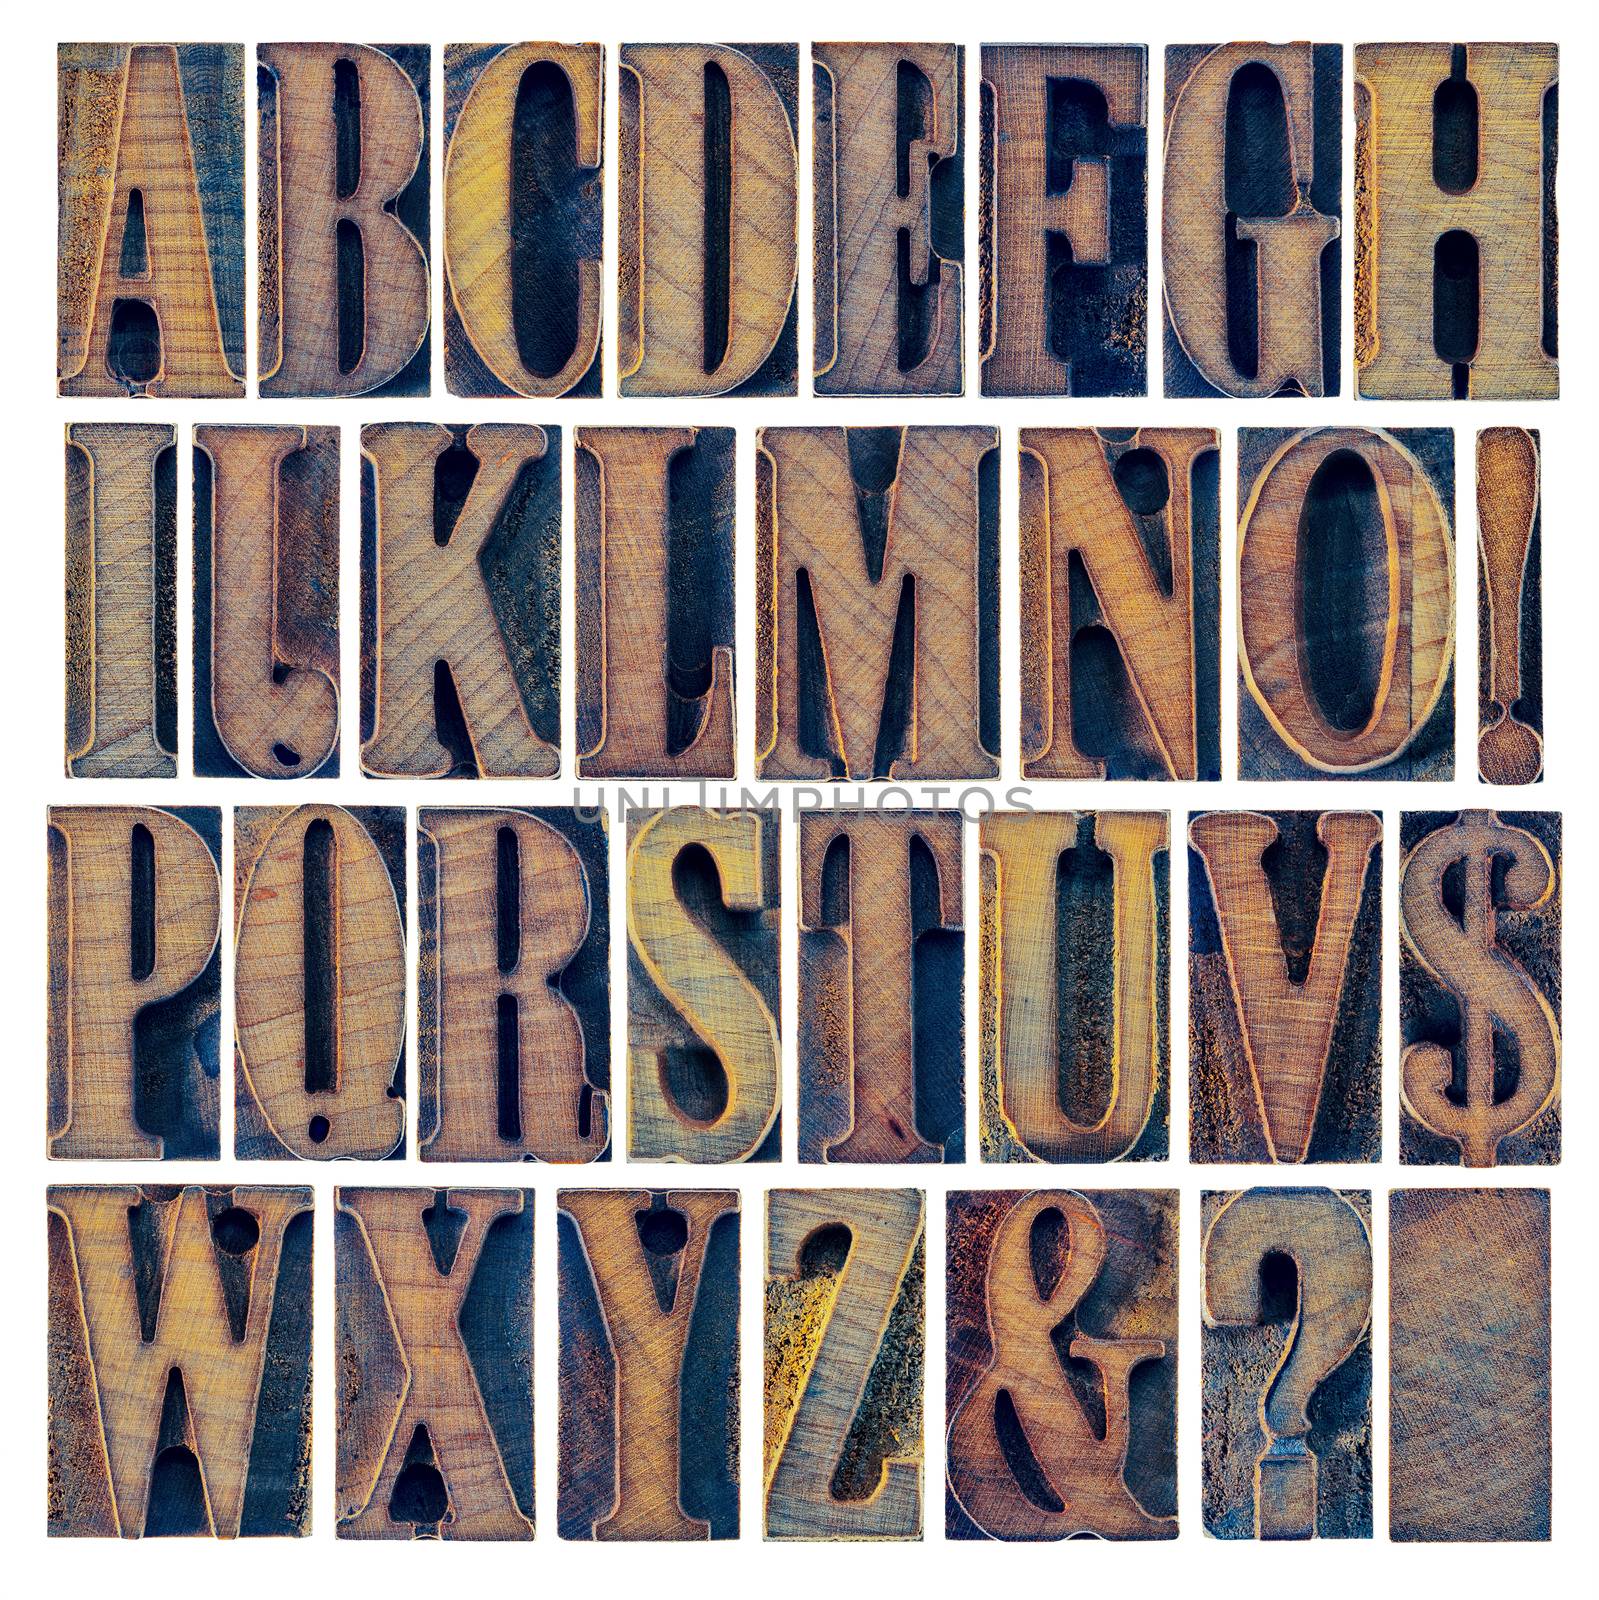 alphabet iand punctuation in wood type by PixelsAway